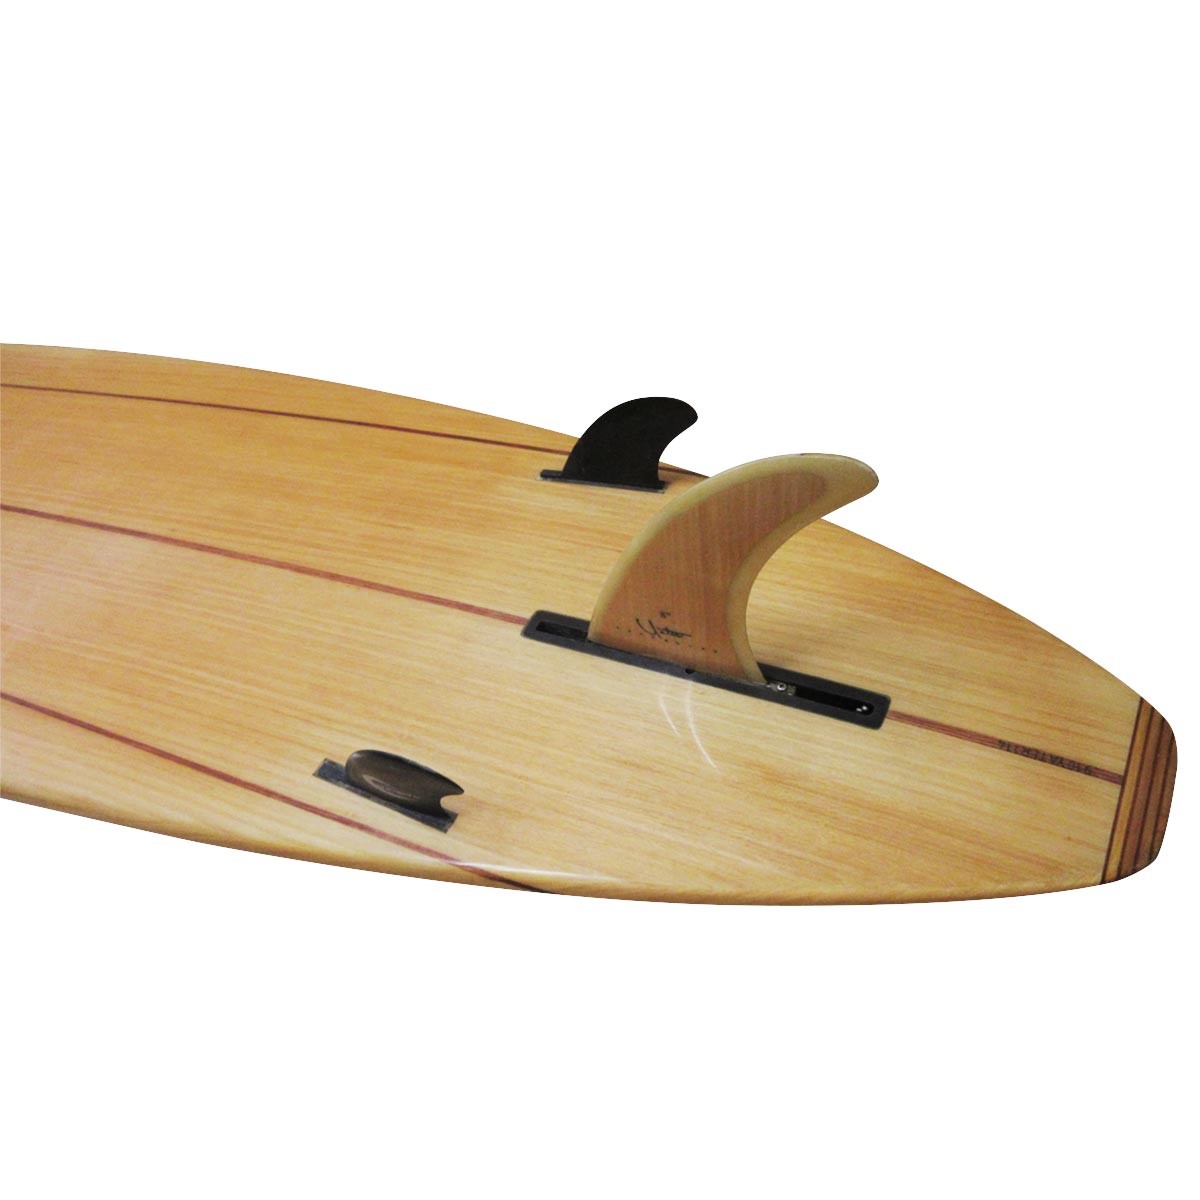 YATER / Allround 9`10 Woody Surftech